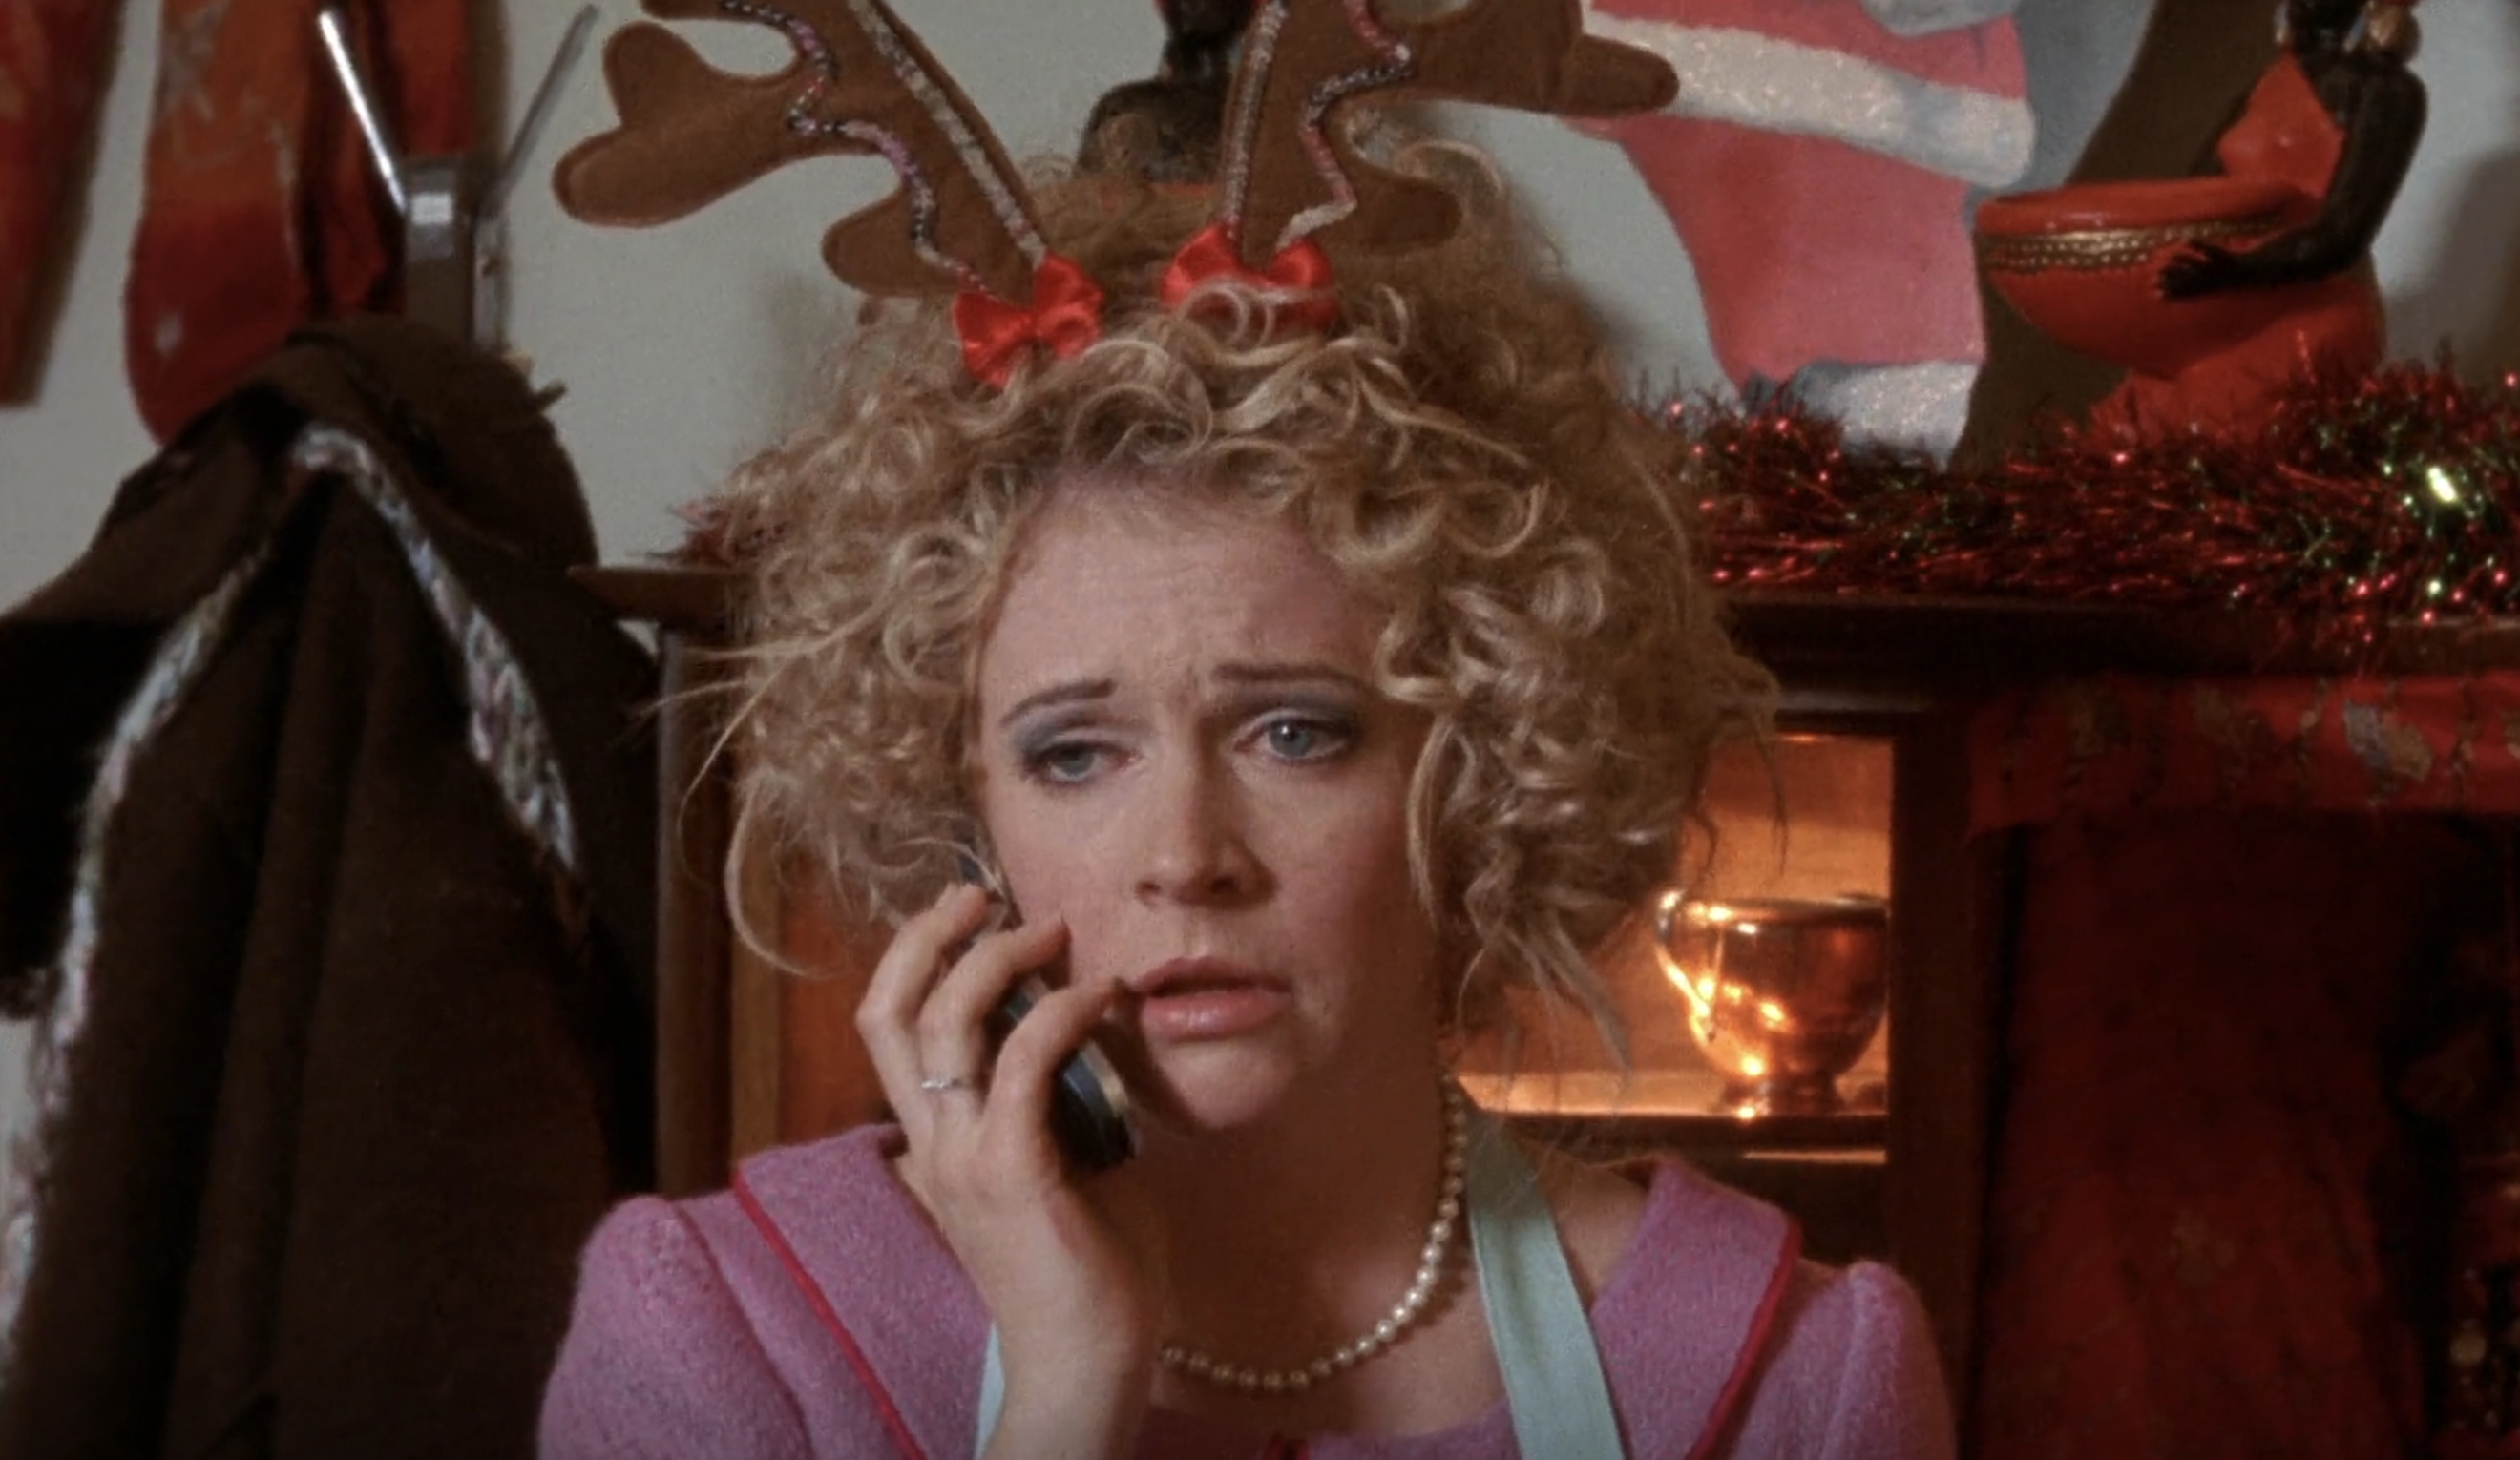 Melissa Joan Hart in a pink dress as a diner while wearing reindeer ears